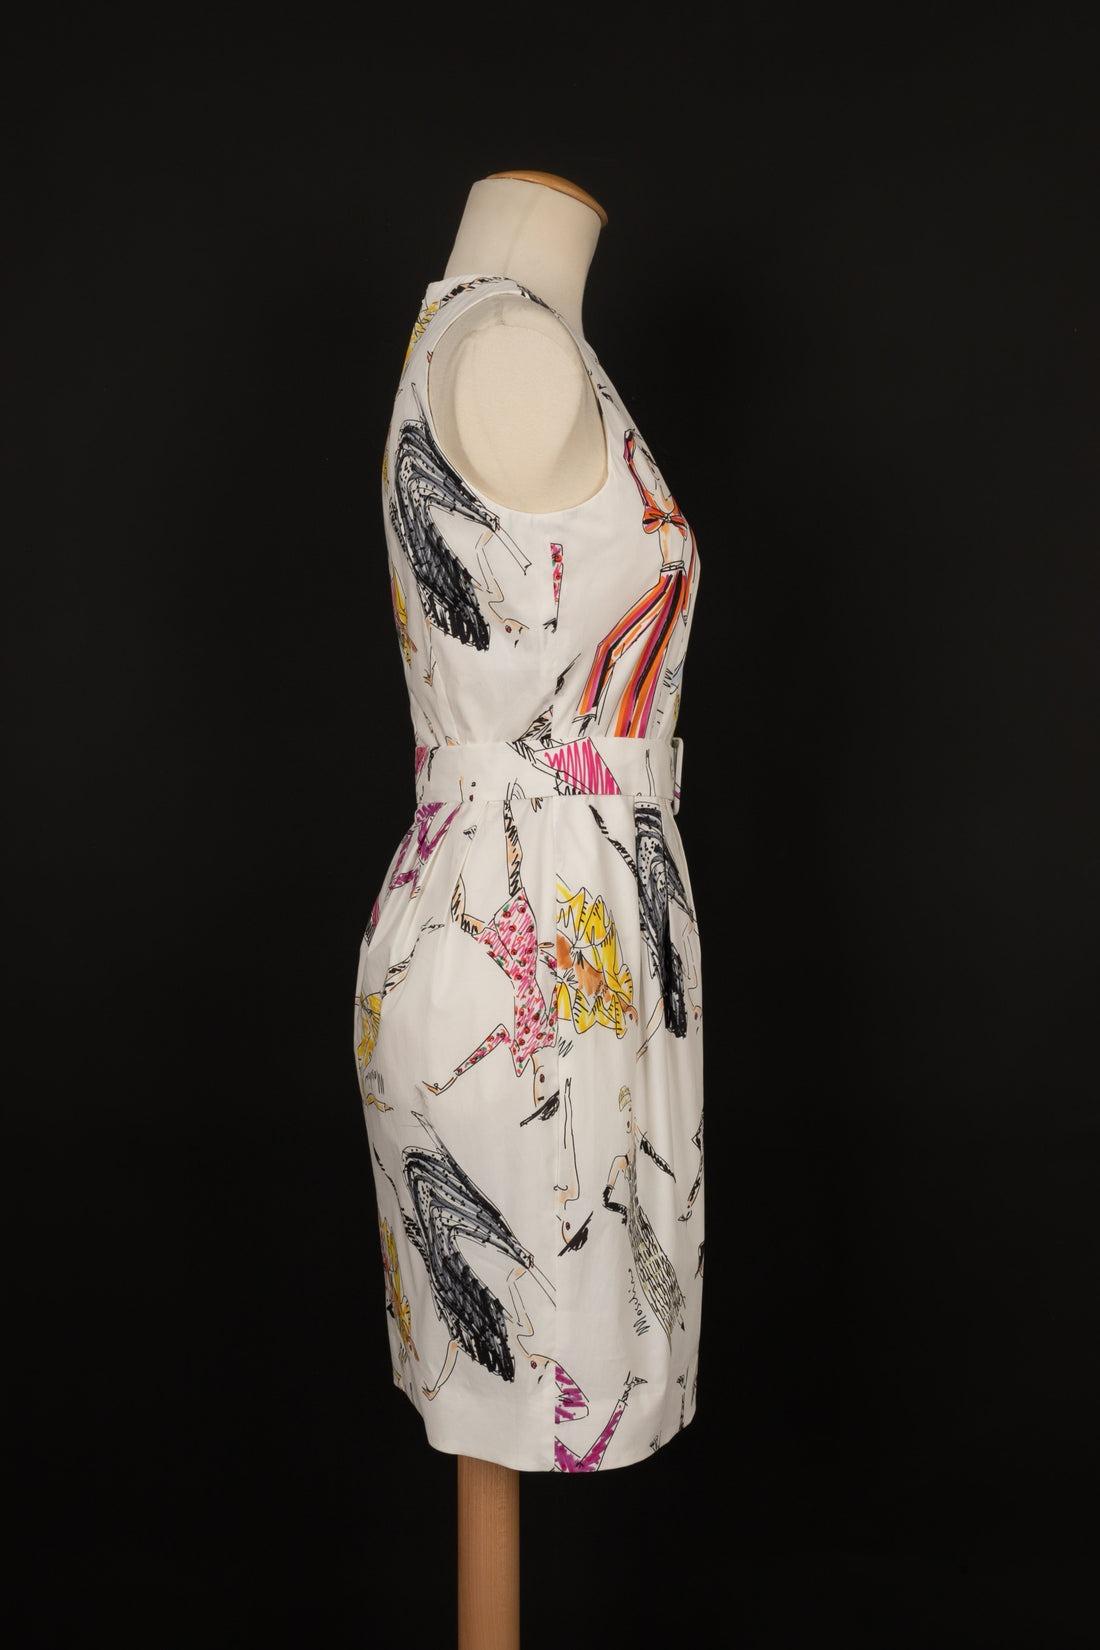 Moschino - (Made in Italy) Cotton dress printed with multicolored patterns on a white background. Indicated size 34FR. Spring/Summer 2019 Ready-To-Wear Collection.

Additional information:
Condition: Very good condition
Dimensions: Chest: 41 cm -